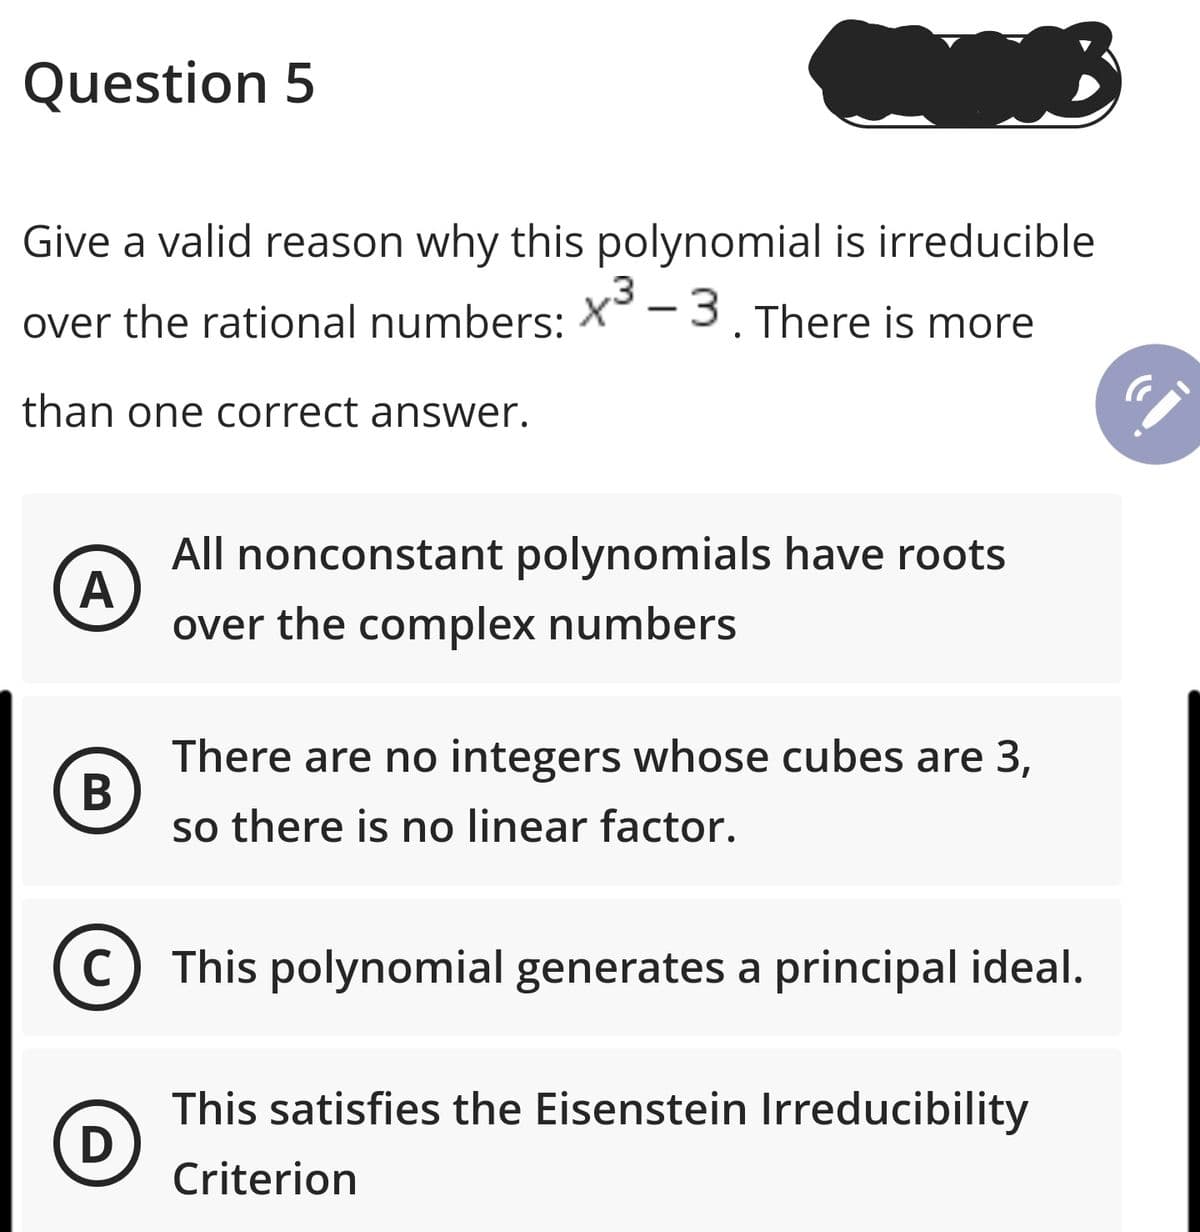 Question 5
Give a valid reason why this polynomial is irreducible
,3
over the rational numbers: X -3. There is more
than one correct answer.
All nonconstant polynomials have roots
A
over the complex numbers
There are no integers whose cubes are 3,
so there is no linear factor.
C
This polynomial generates a principal ideal.
This satisfies the Eisenstein Irreducibility
Criterion
B
